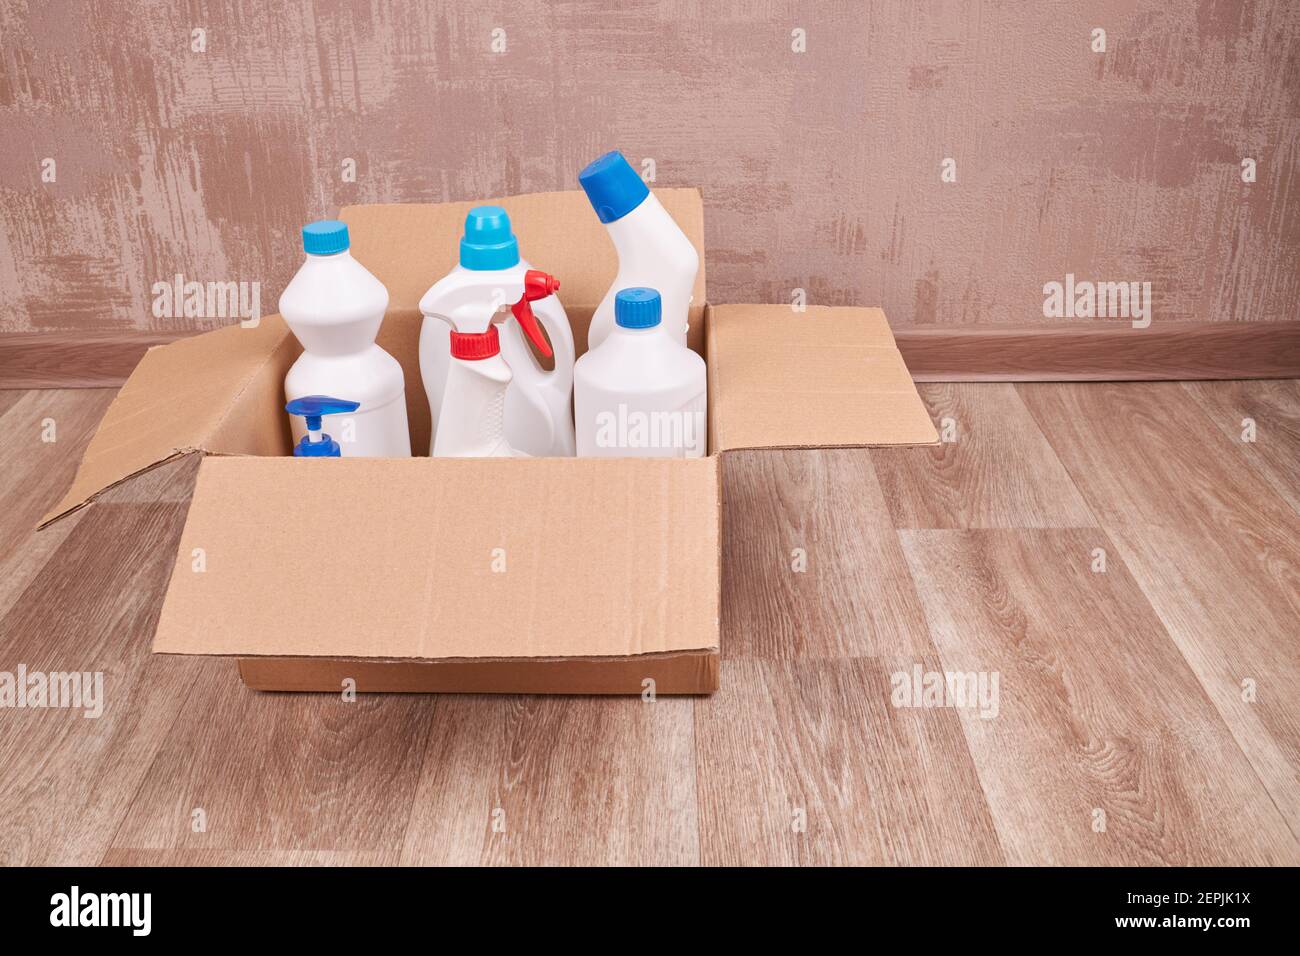 blank cleaning chemicals bottles for housework. product delivery and wash up service concept Stock Photo